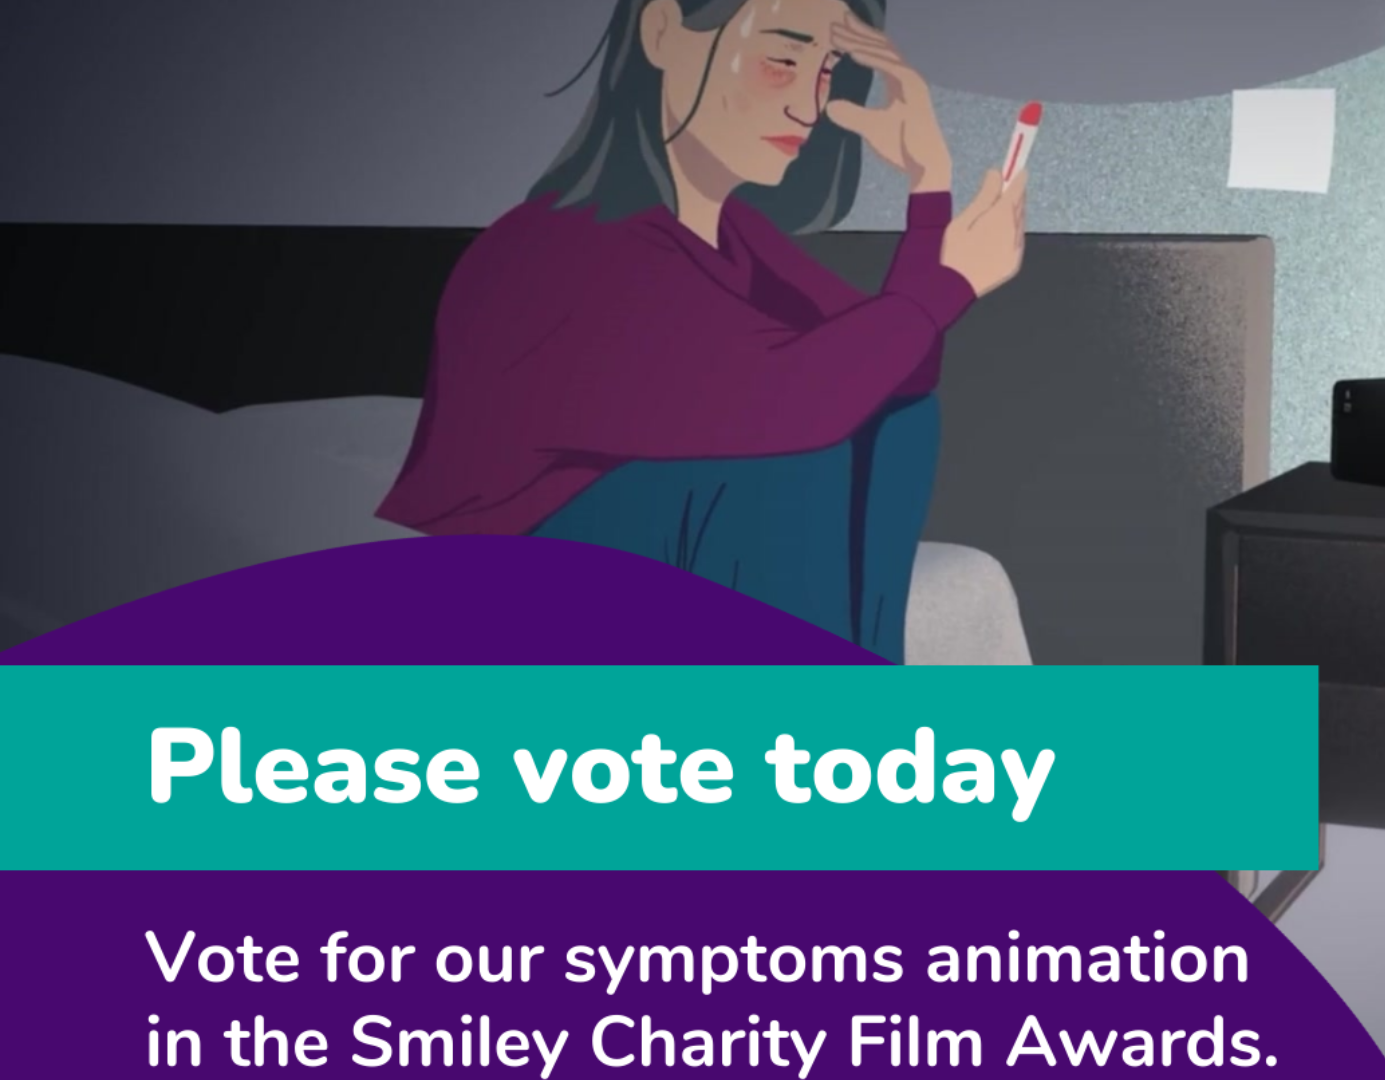 Please vote for our symptoms animation in the Smiley Charity Film Awards